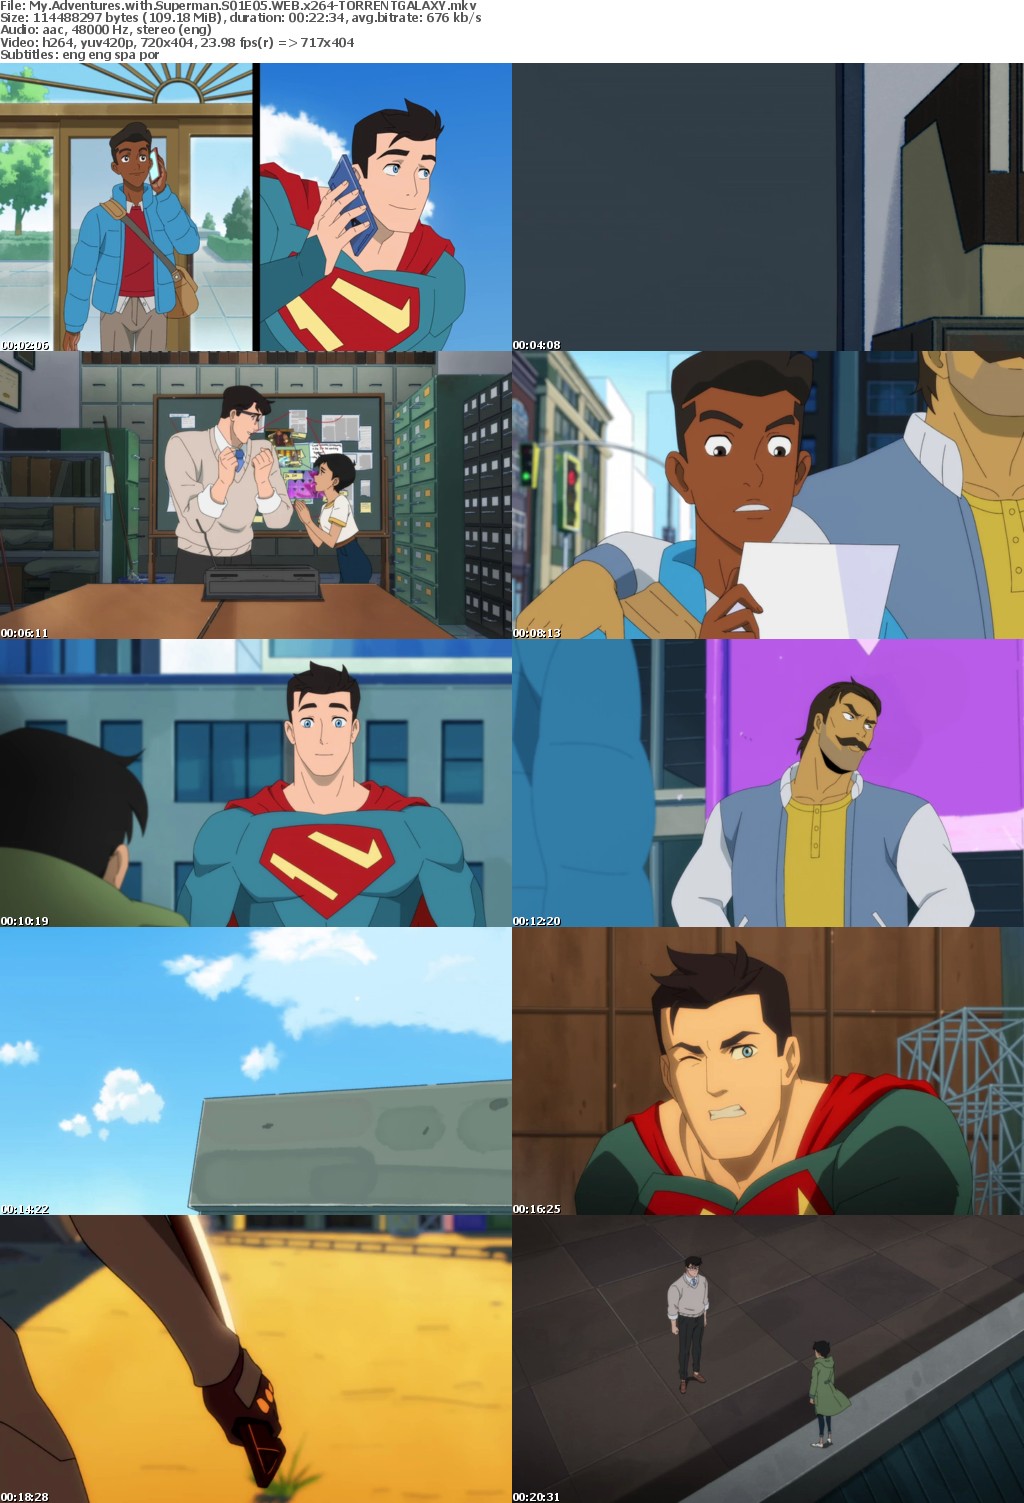 My Adventures with Superman S01E05 WEB x264-GALAXY